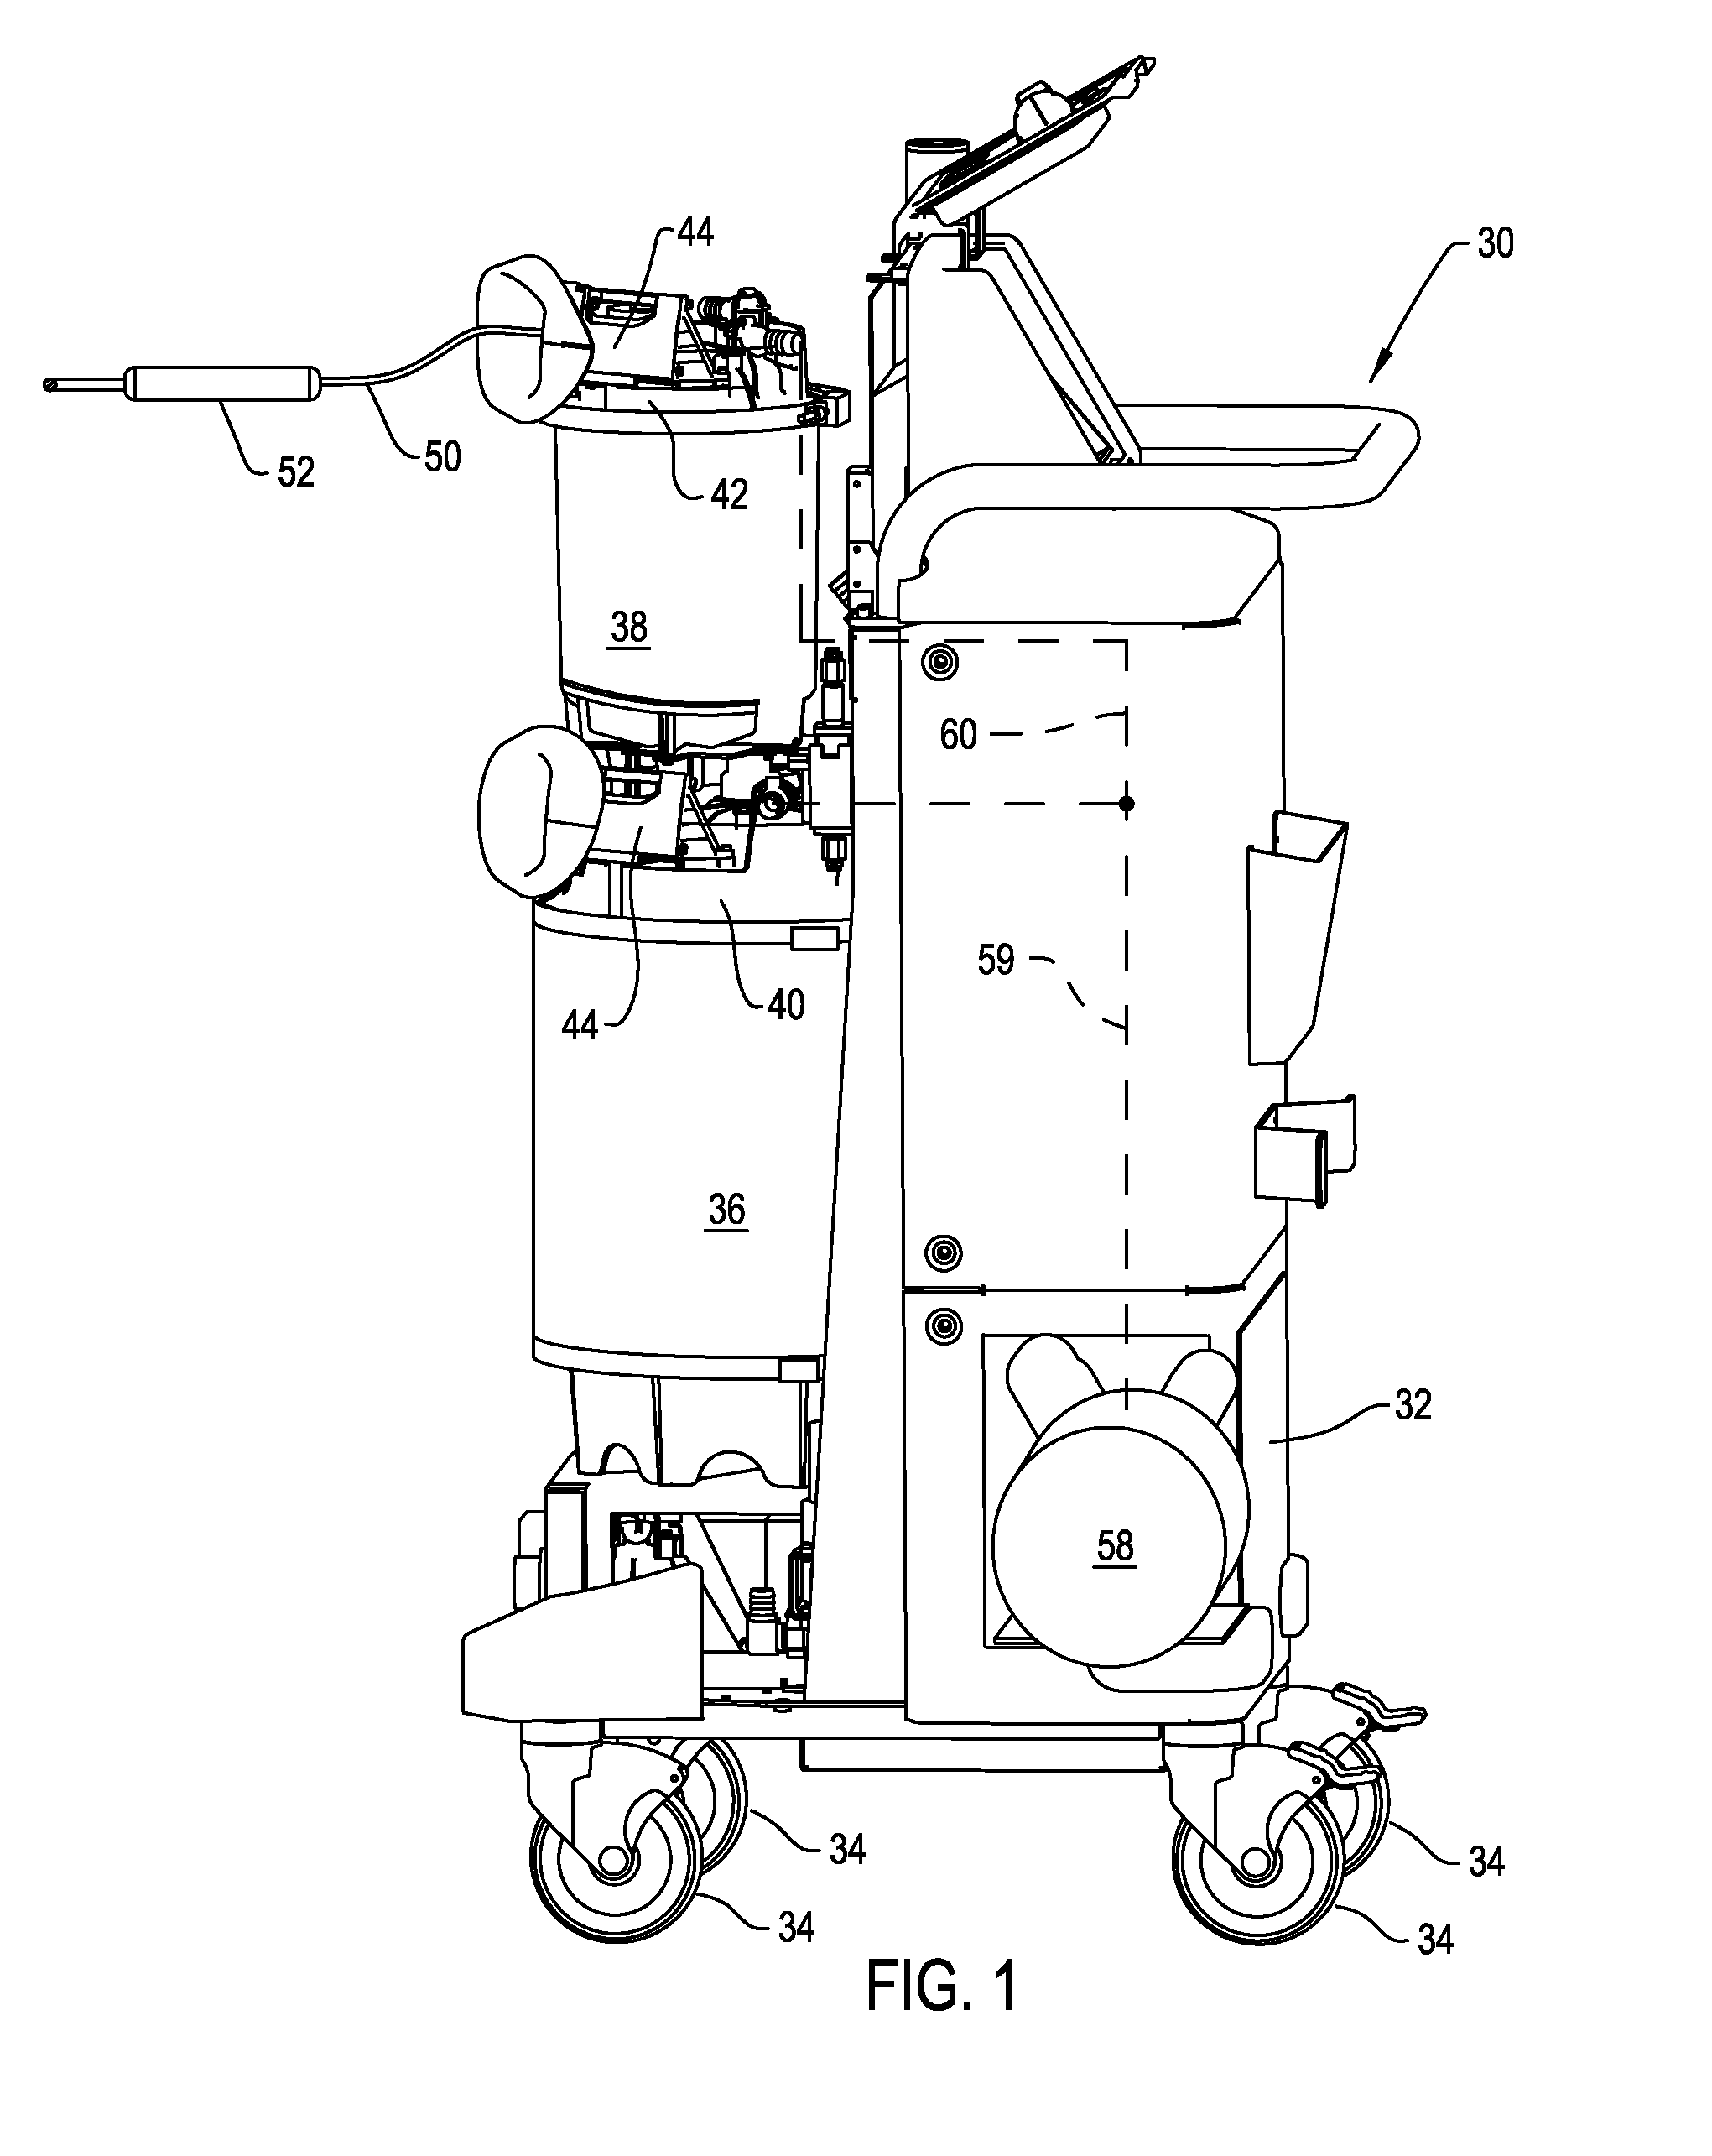 Removable inlet manifold for a medical/surgical waste collection system, the manifold including a driver for actuating a valve integral with the waste collection system